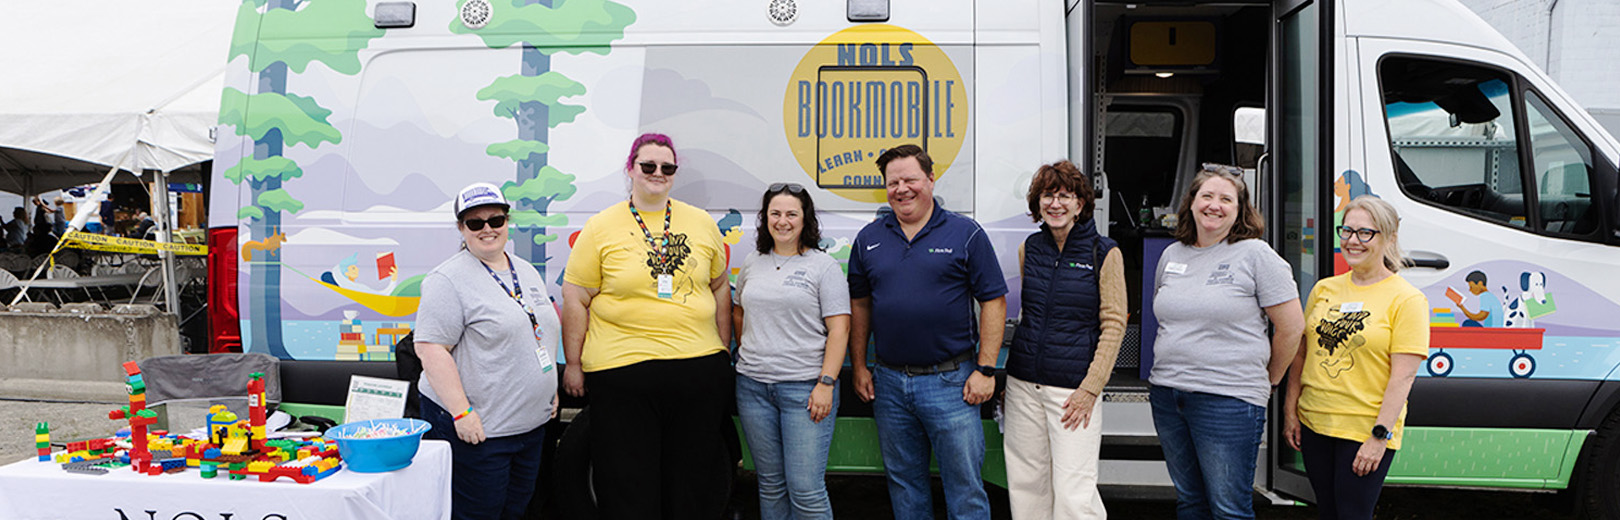 First Fed team with NOLA team in front of the Bookmobile